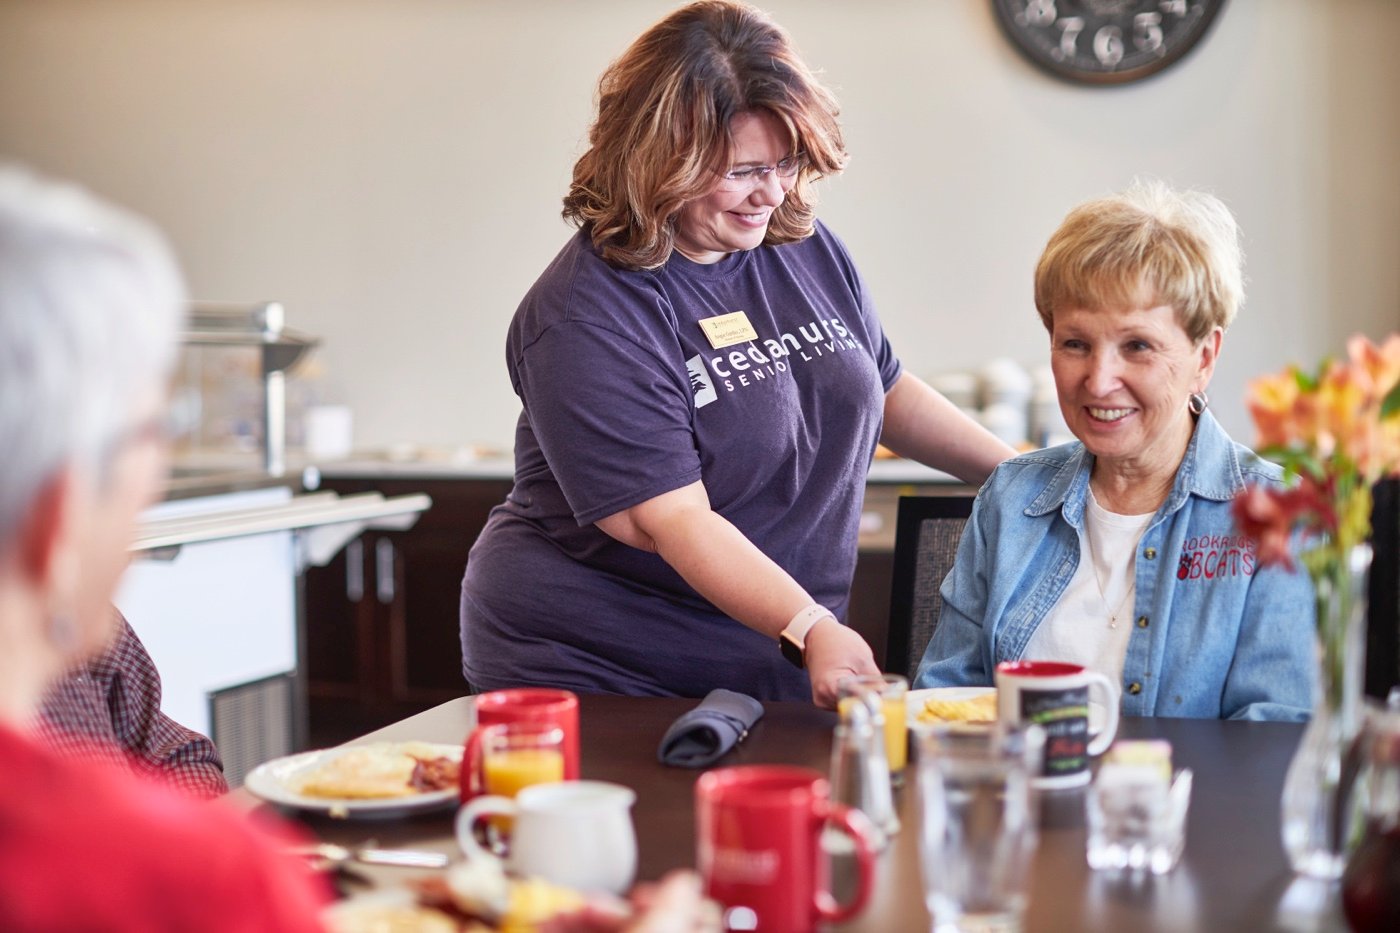 EdisonLakes_Homepage_PictureYourselfHere_About_You_Caregiver_Serving_Food_To_Resident